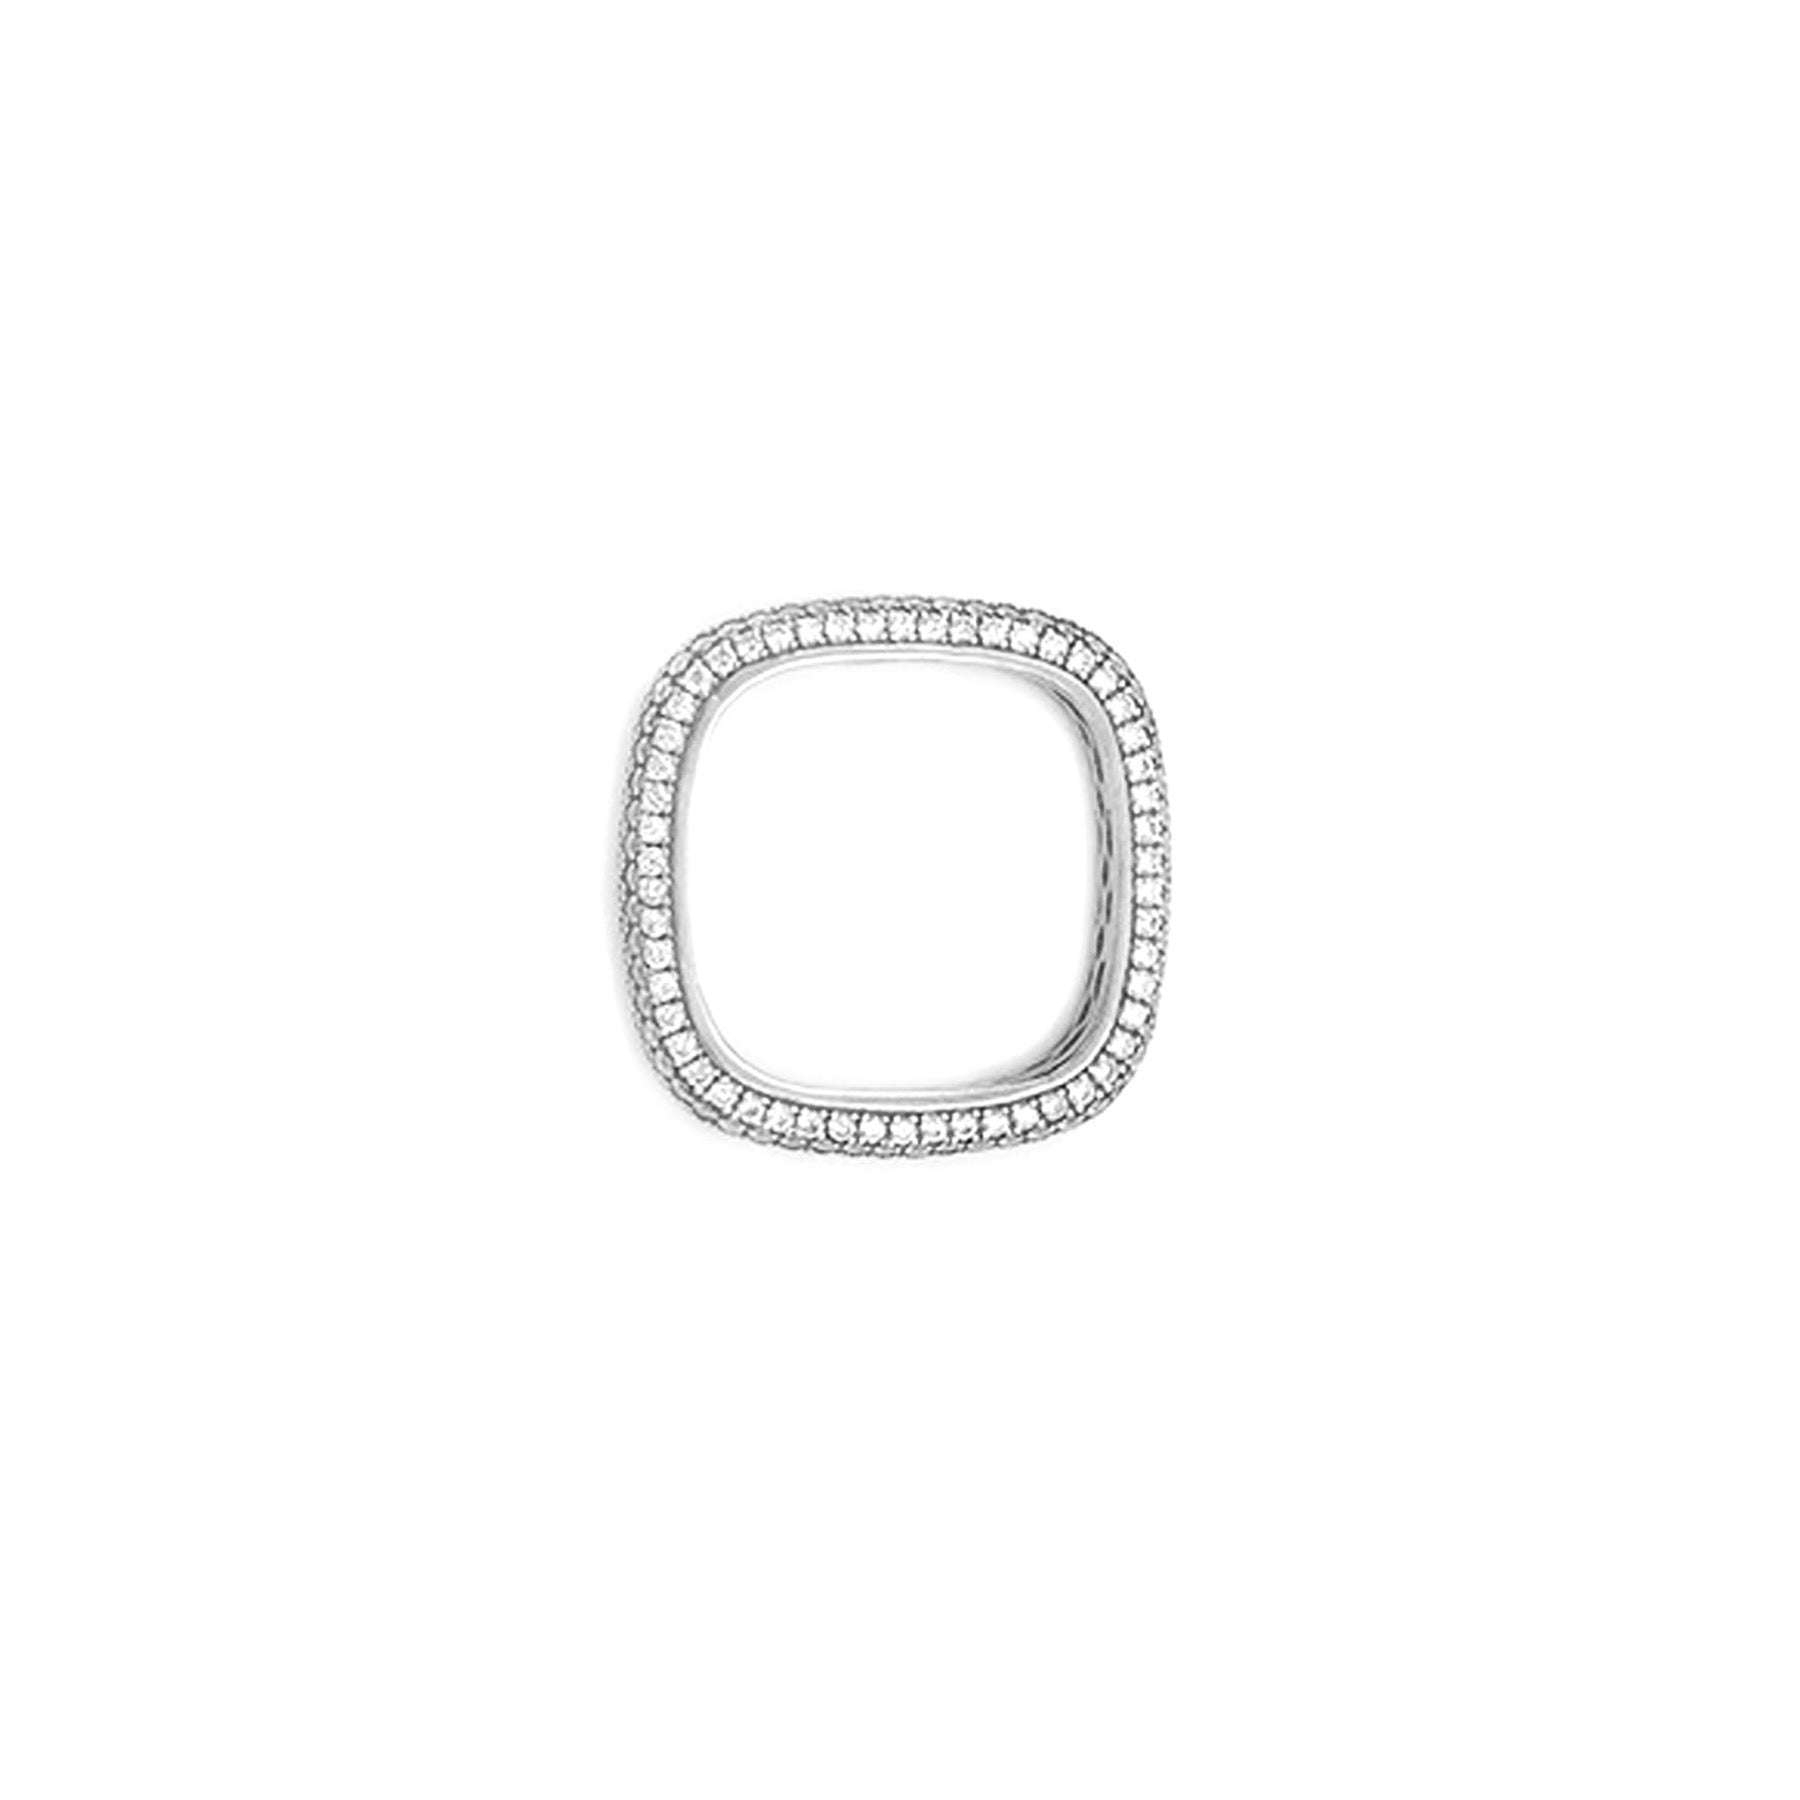 Skinny Silver Pave Square Band Ring - Camille Jewelry